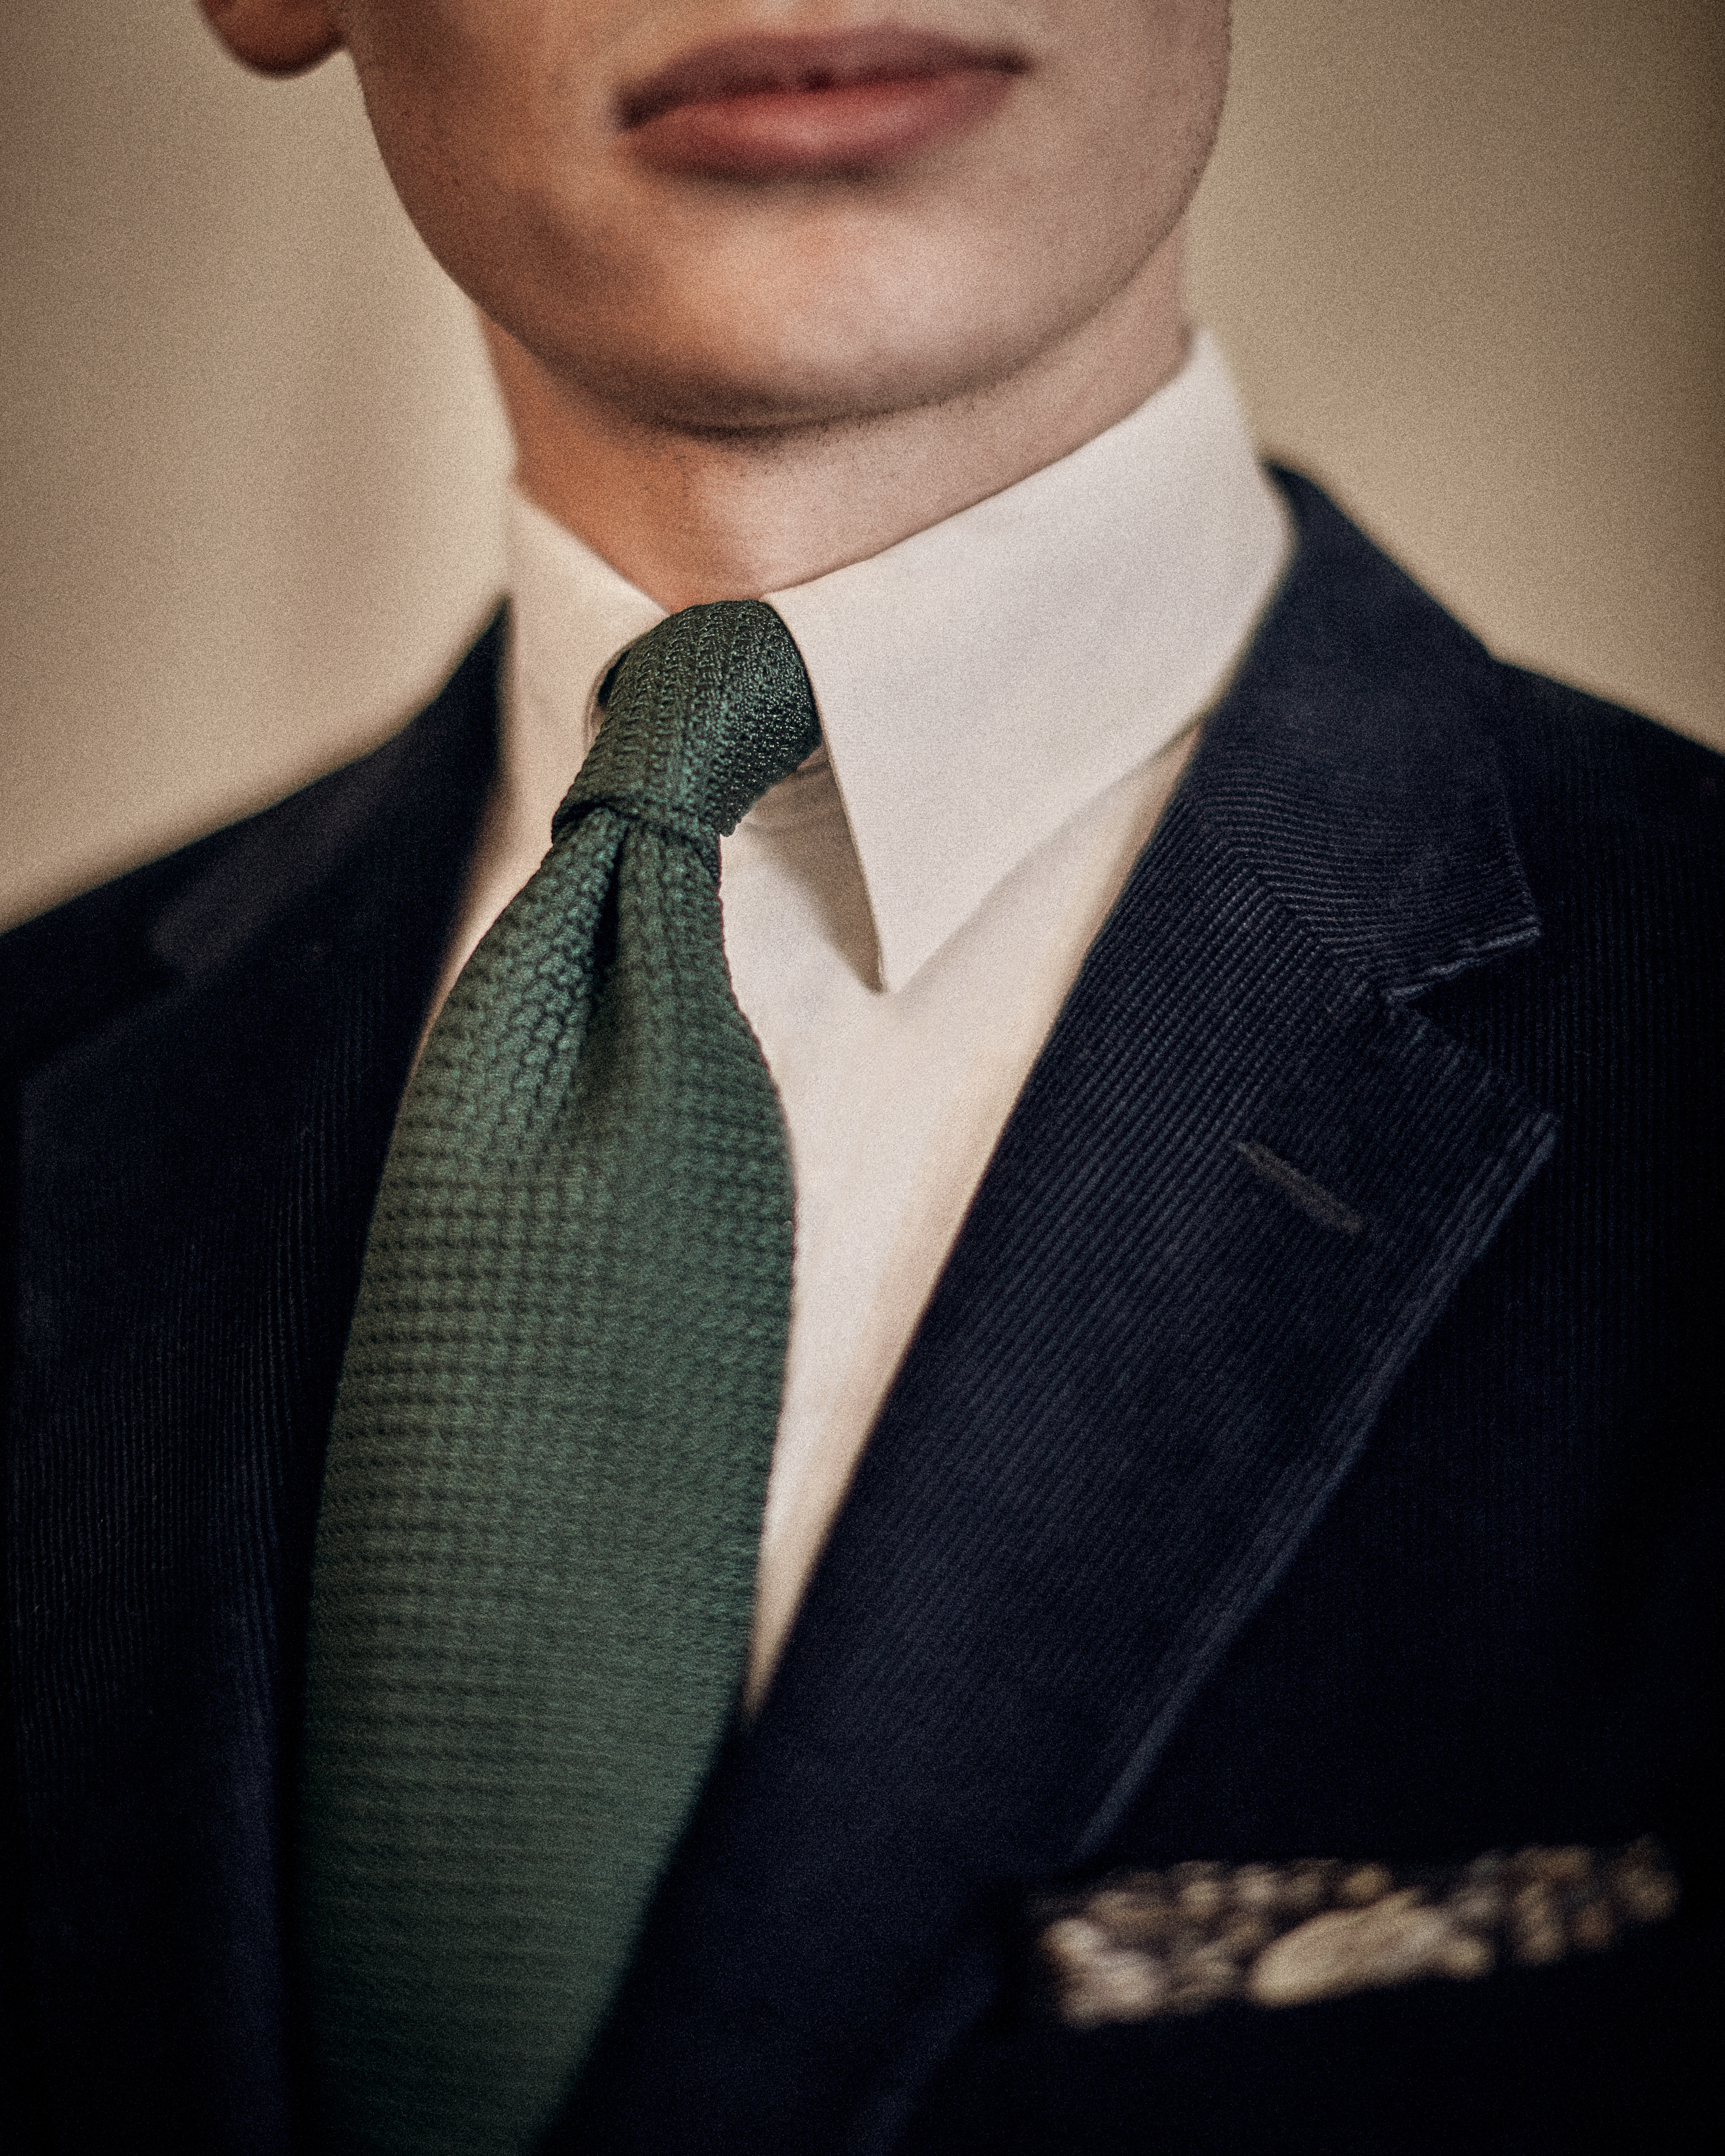 Mathias le Fevre for eton shirts in gieves and hawkes suit_7